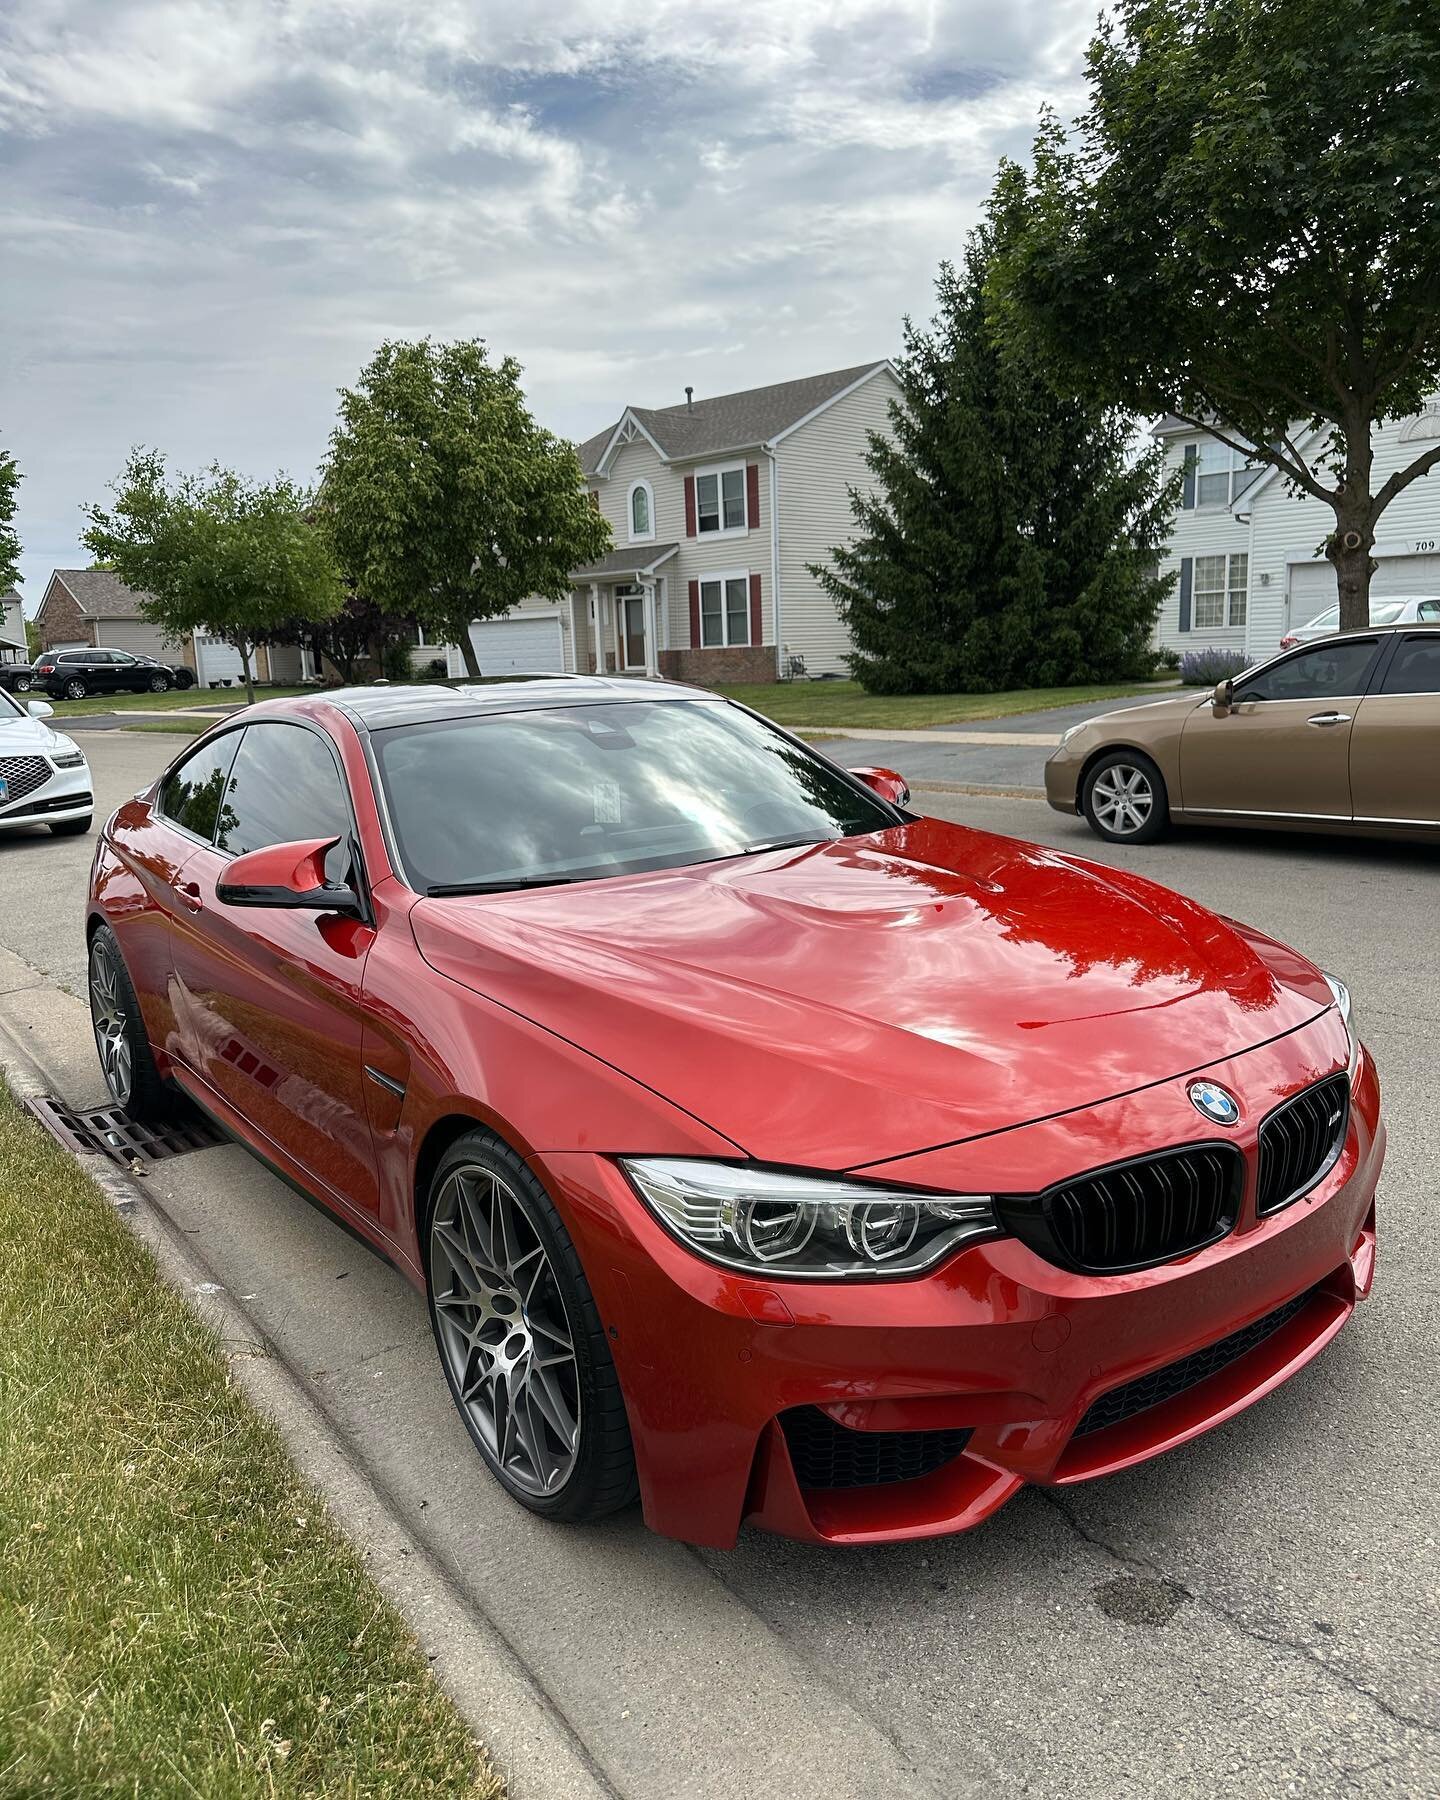 This Stunning BMW M4 Came In For A CarCentral Detail, They Are Now A Monthly Maintenance Client! Exterior &amp; Interior Detail | Exterior Hand Wash | Iron Decontamination | Clay Bar Treatment | Apply Ceramic Spray Sealant | Hand Wash Wheels | Apply 